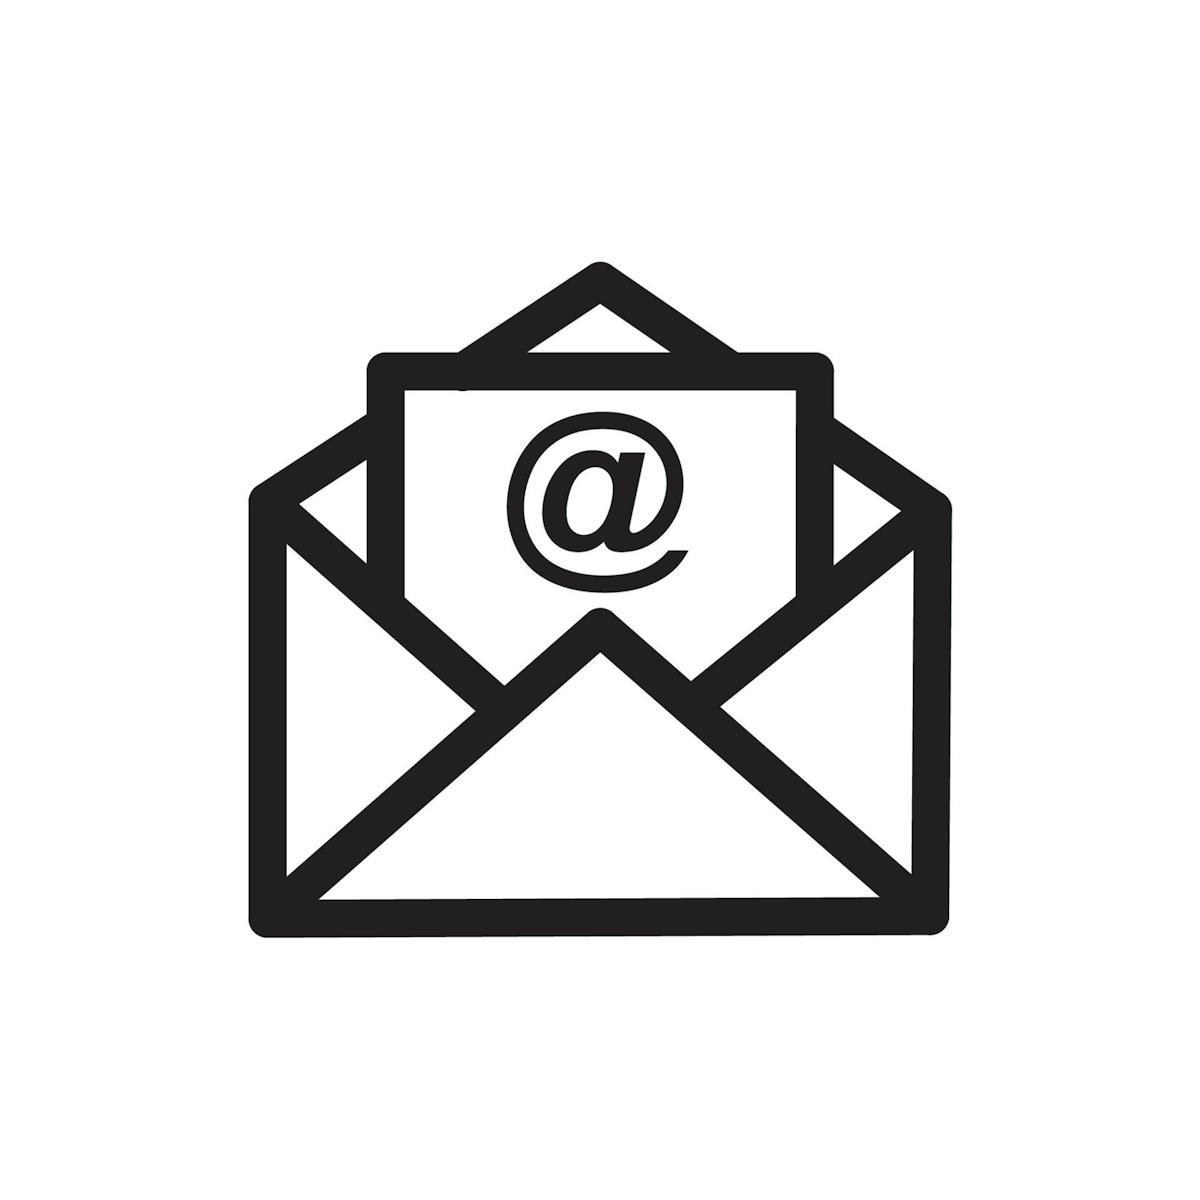 Send an email to Esmé Illustrates